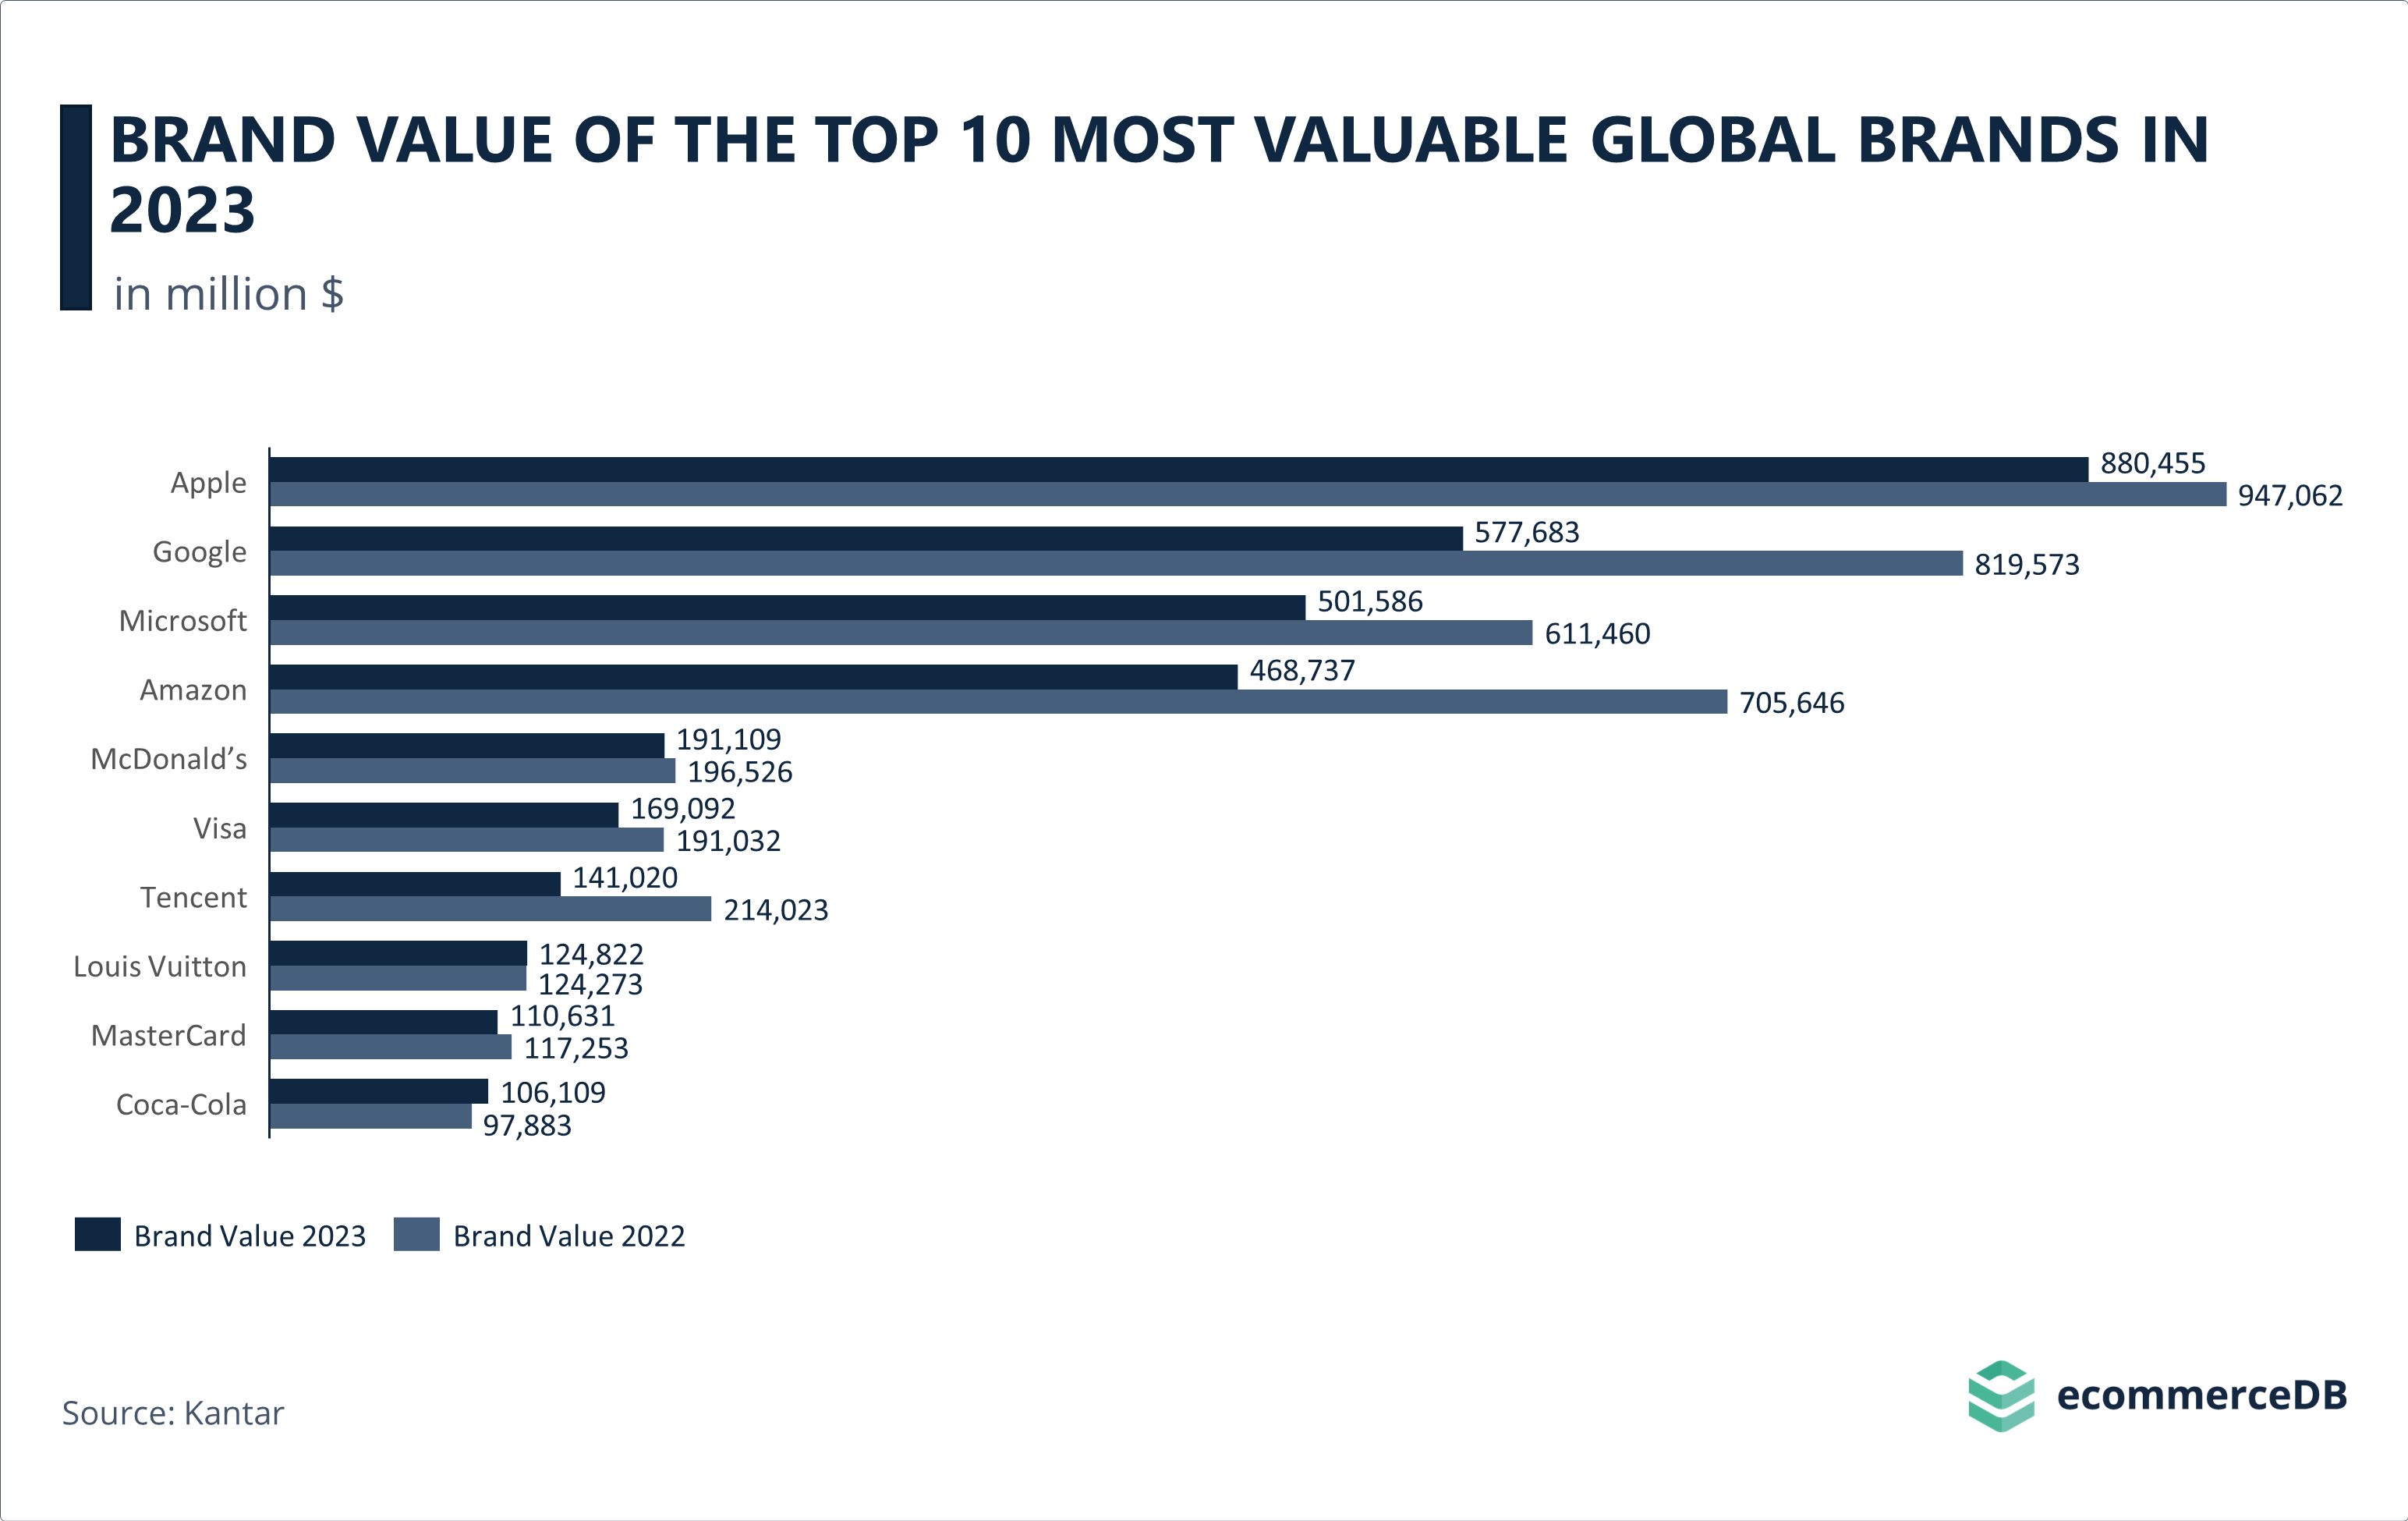 Brand Value of the Top 10 Most Valuable Global Brands in 2023